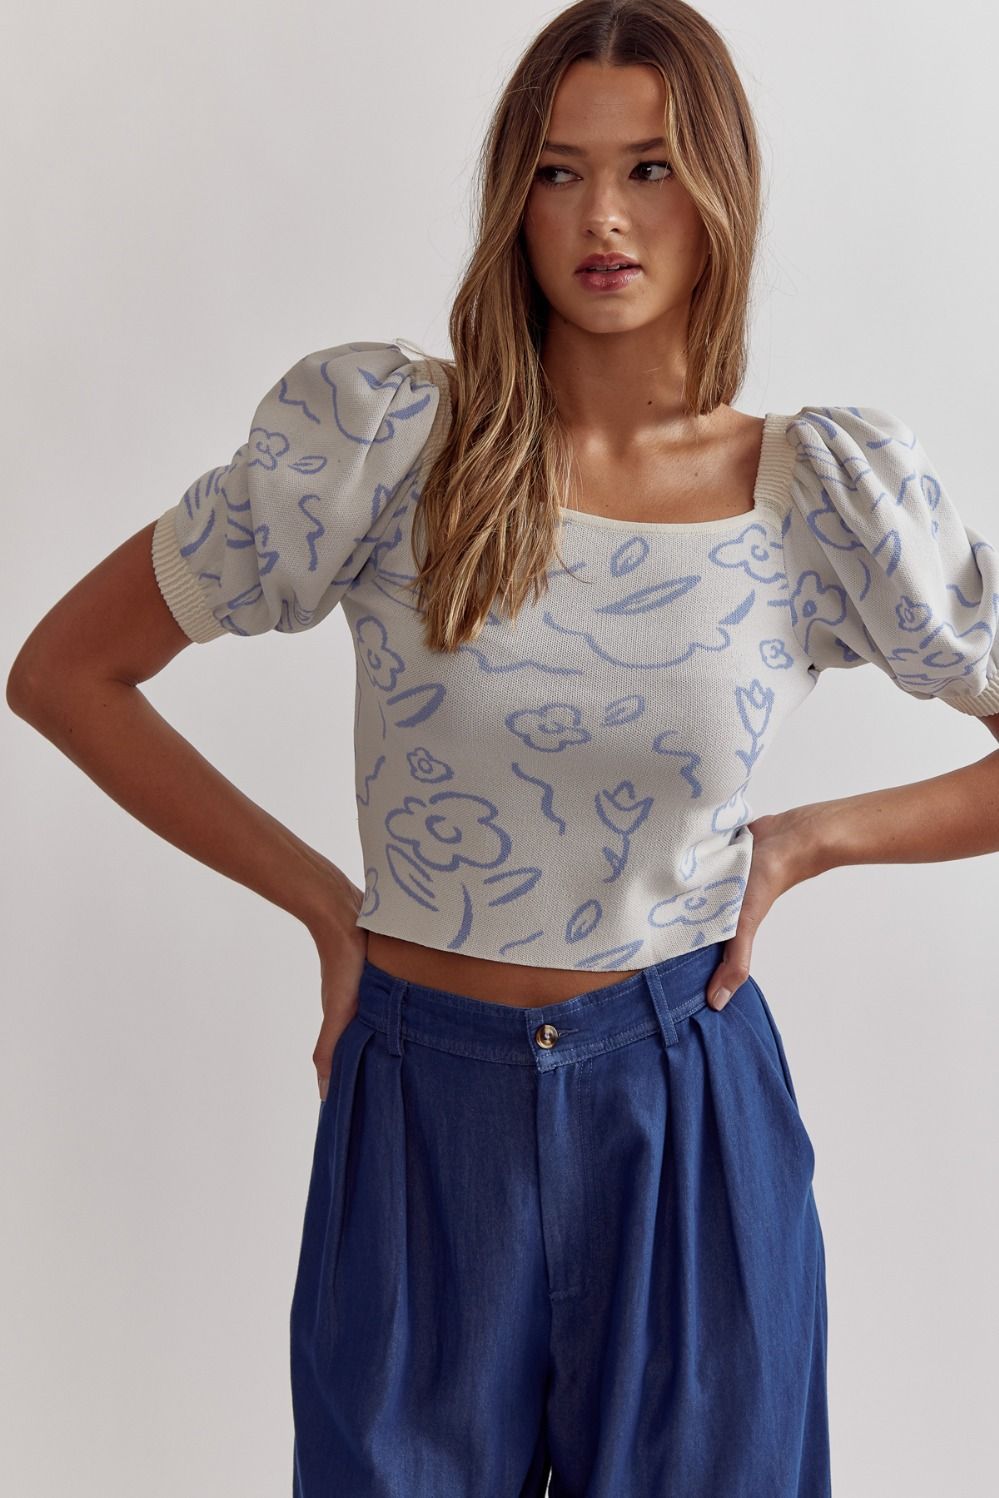 Entro | Ivory Abstract Floral Top | Sweetest Stitch Online Boutique